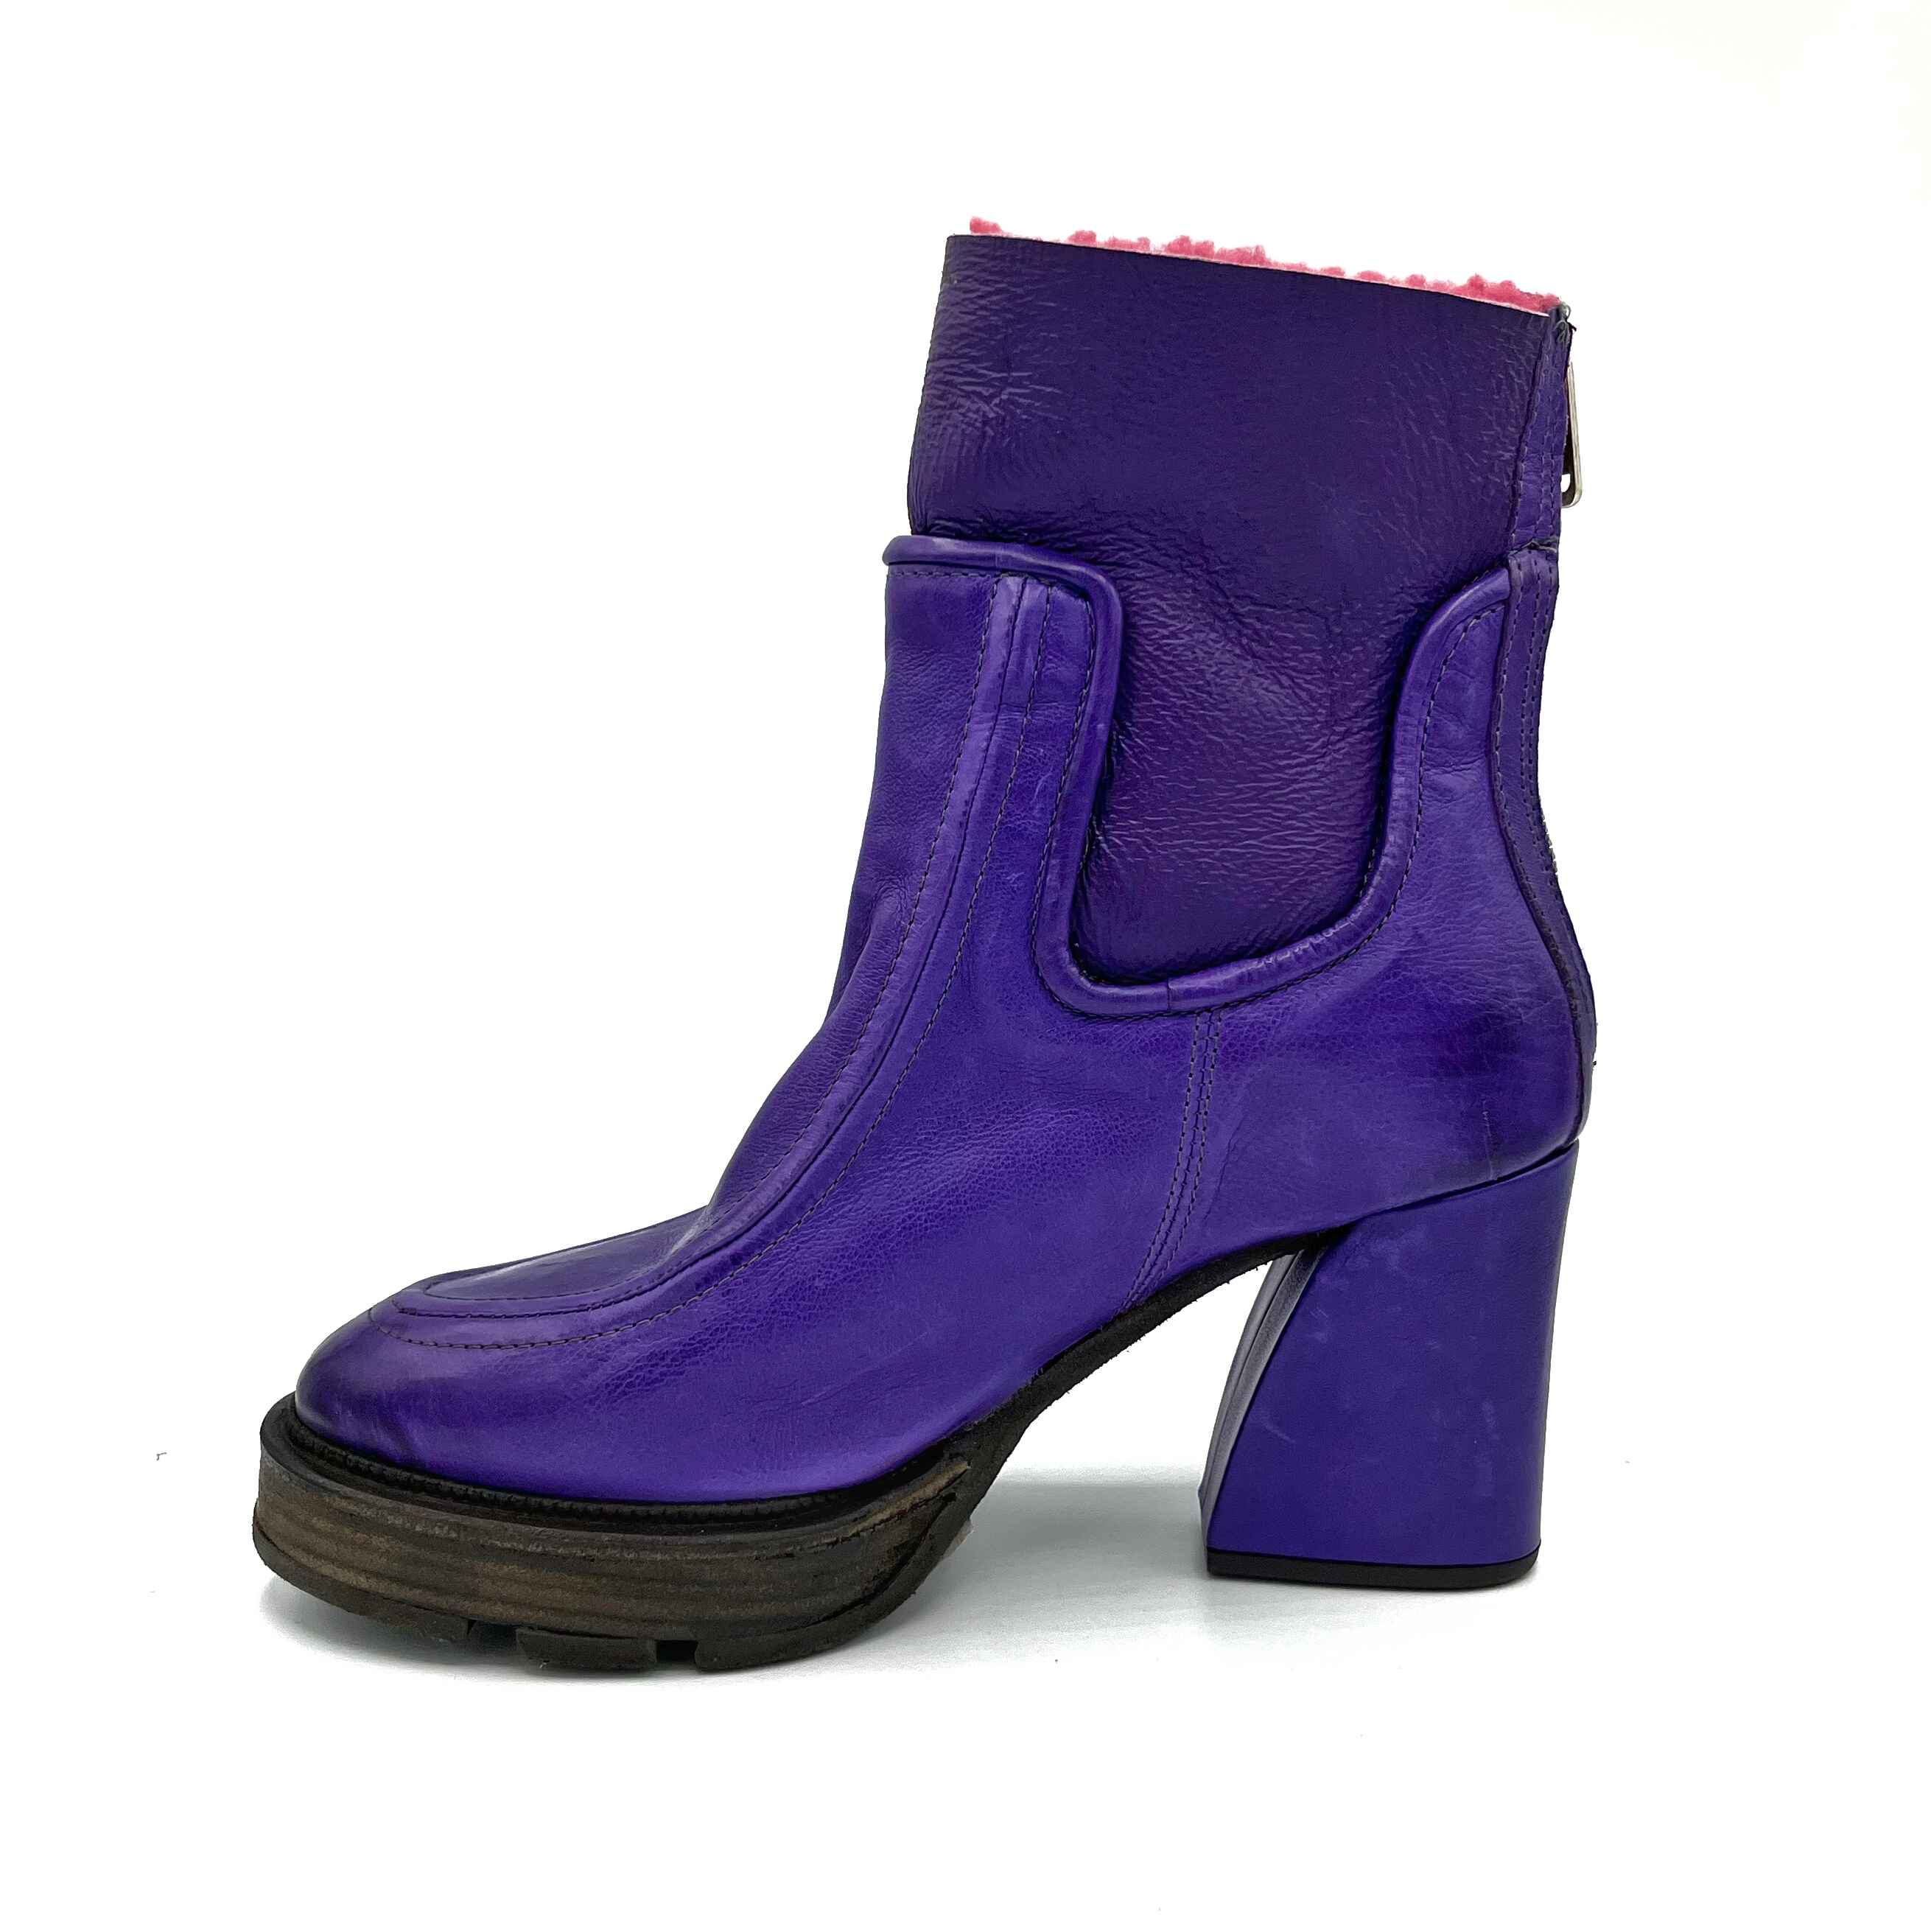 Inner side view of the A.S.98 Linkin Fur Boot in toxic. This boot is purple on the outside with pink sherpa lining. The boot has a high heel and almond toe.